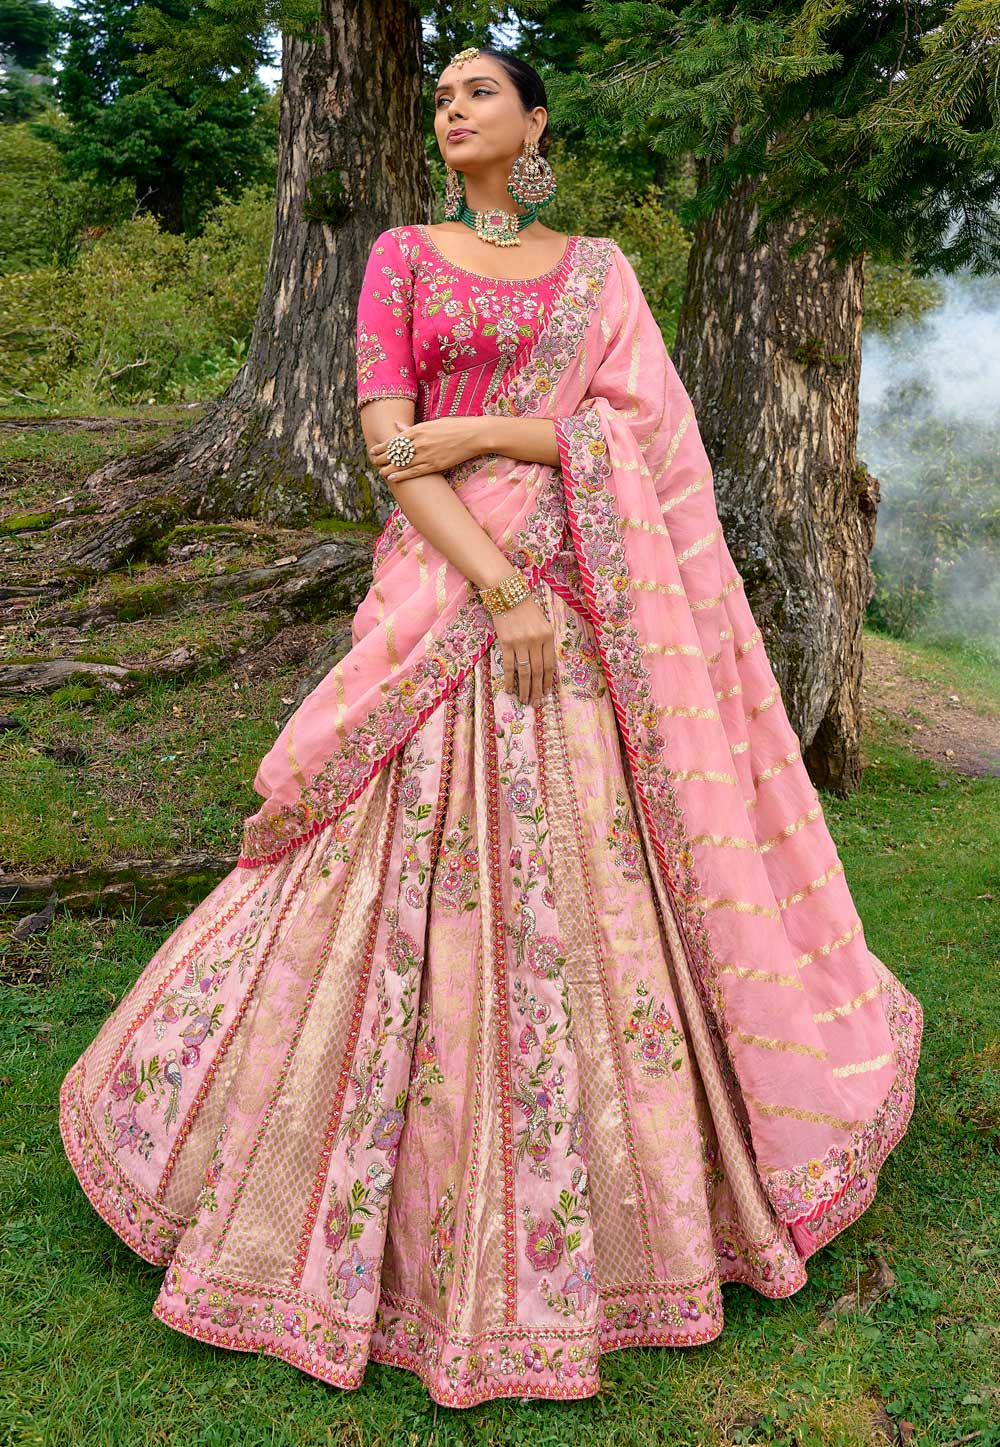 Velvet Bridal Lehenga Choli with All Over Embroidered Flower-Sequins Motif  and Beautiful Dupatta | Exotic India Art